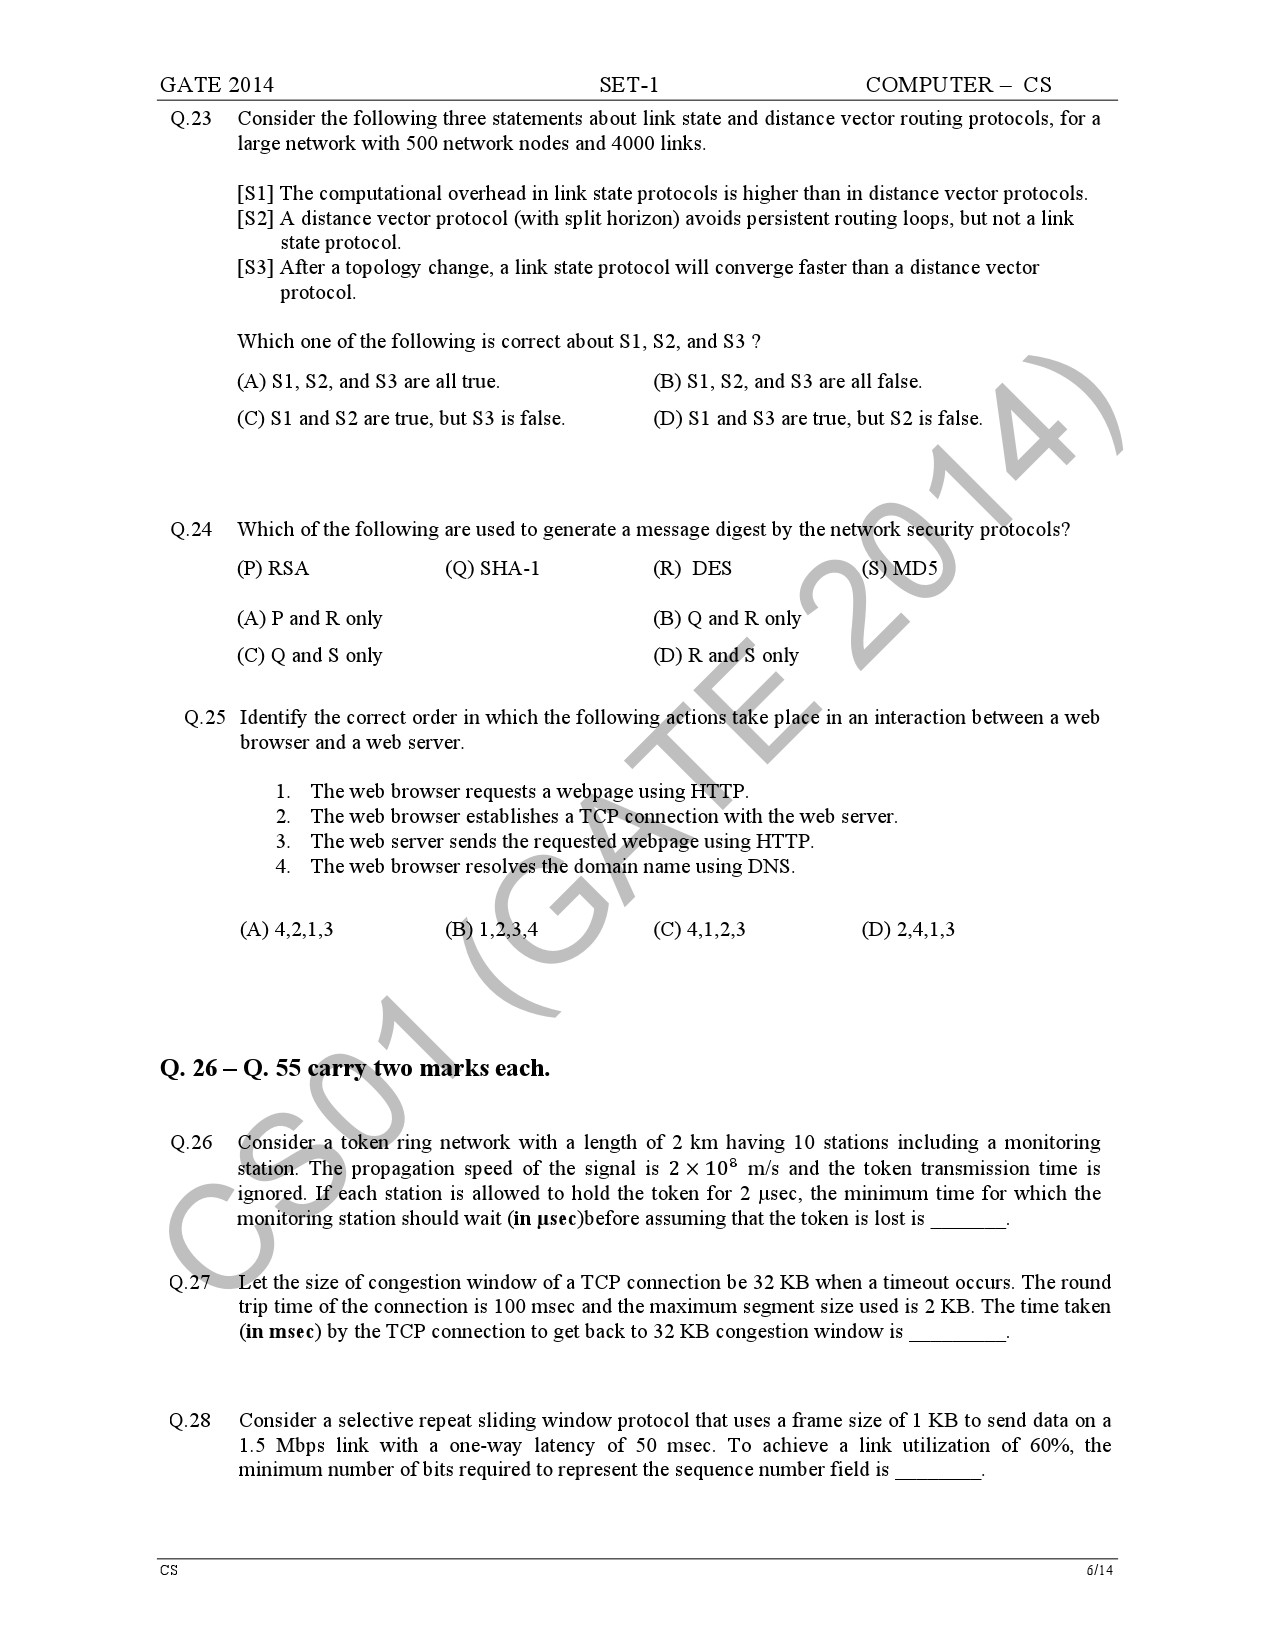 GATE Exam Question Paper 2014 Computer Science and Information Technology Set 1 12